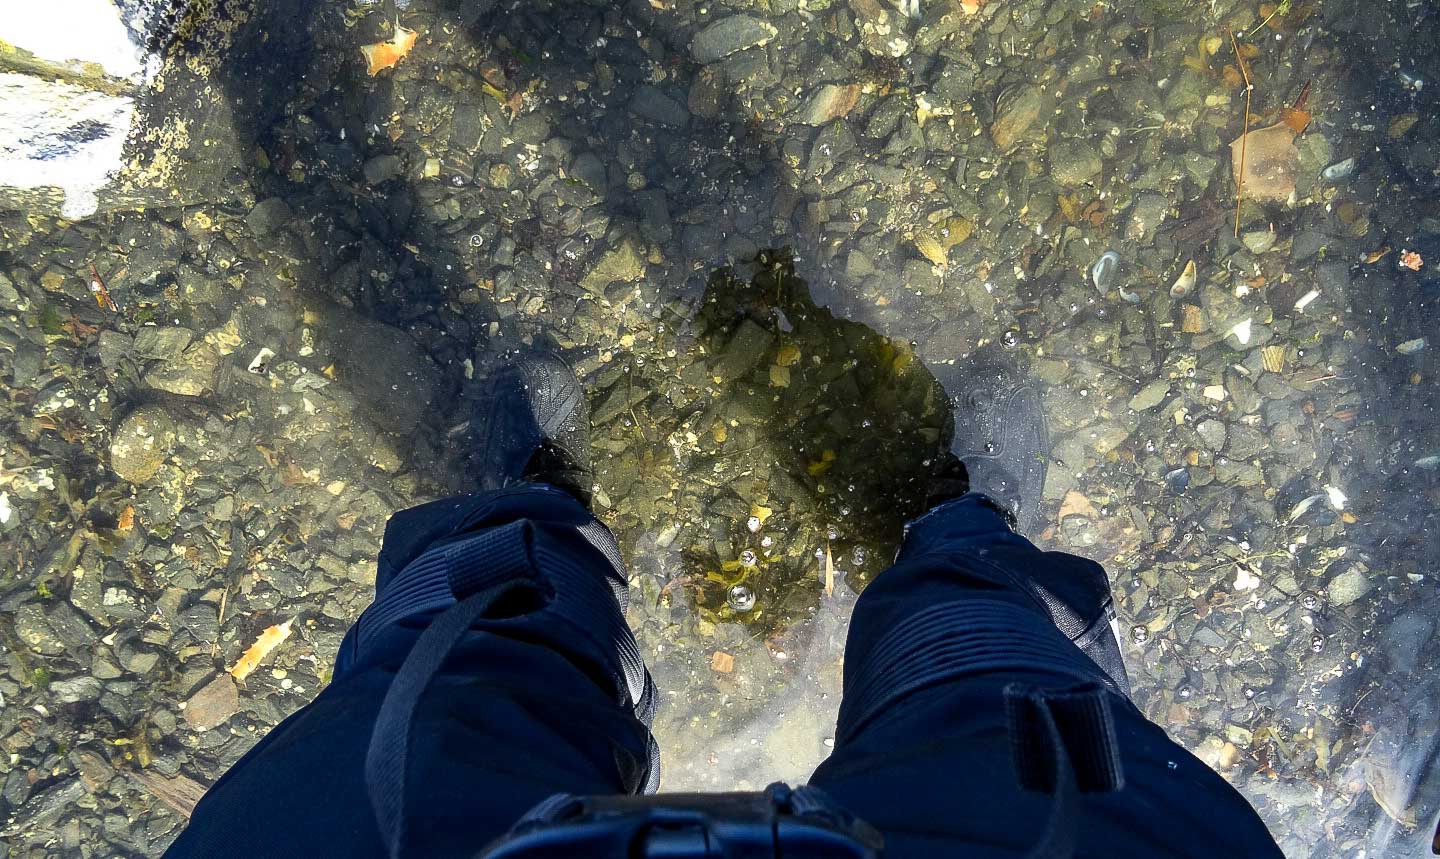 Boots in The Water - Rockhurst Harbour, Hecate Straight, BC